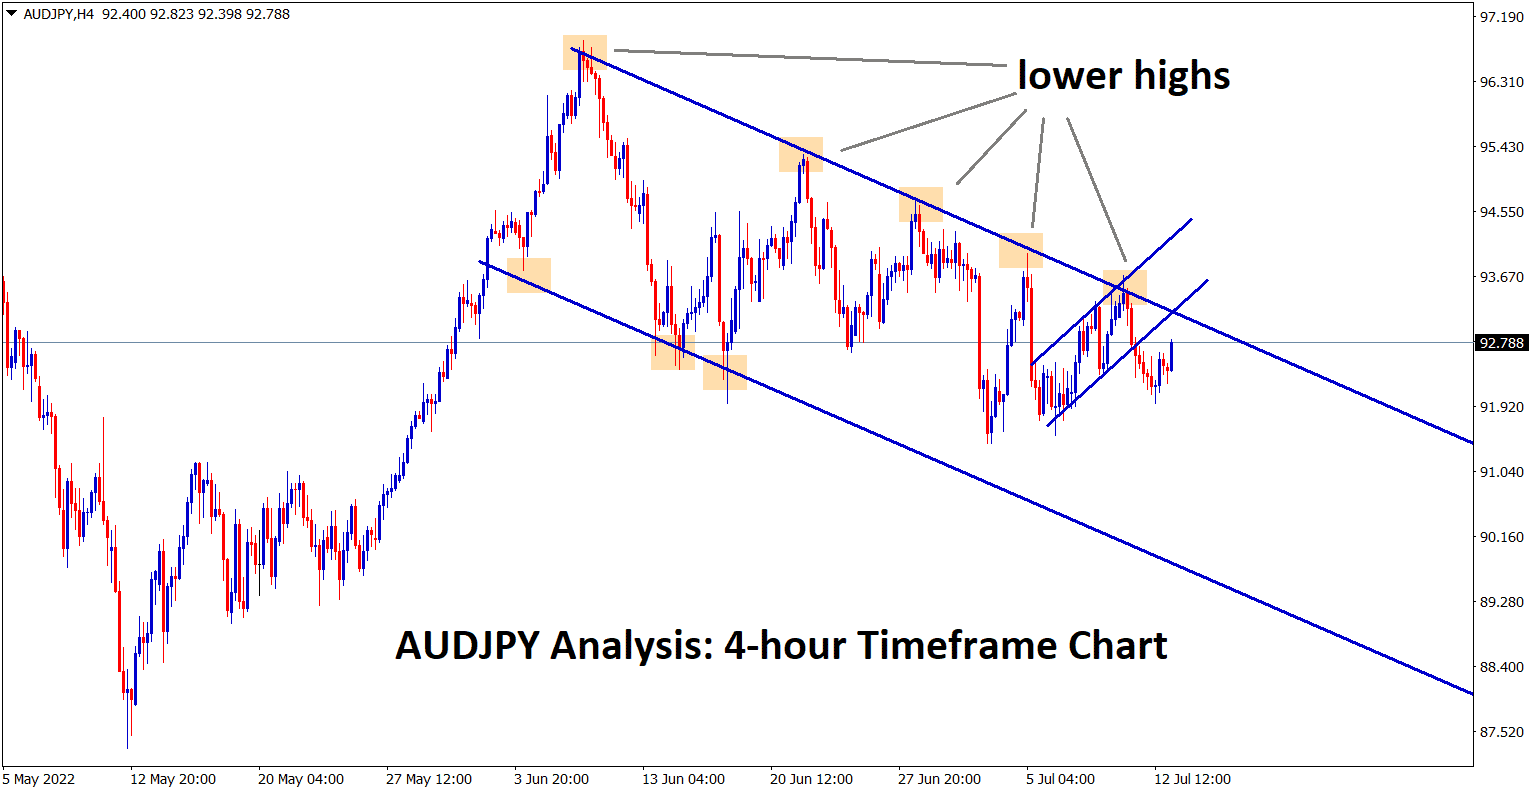 AUDJPY is rebounding back to the higher level